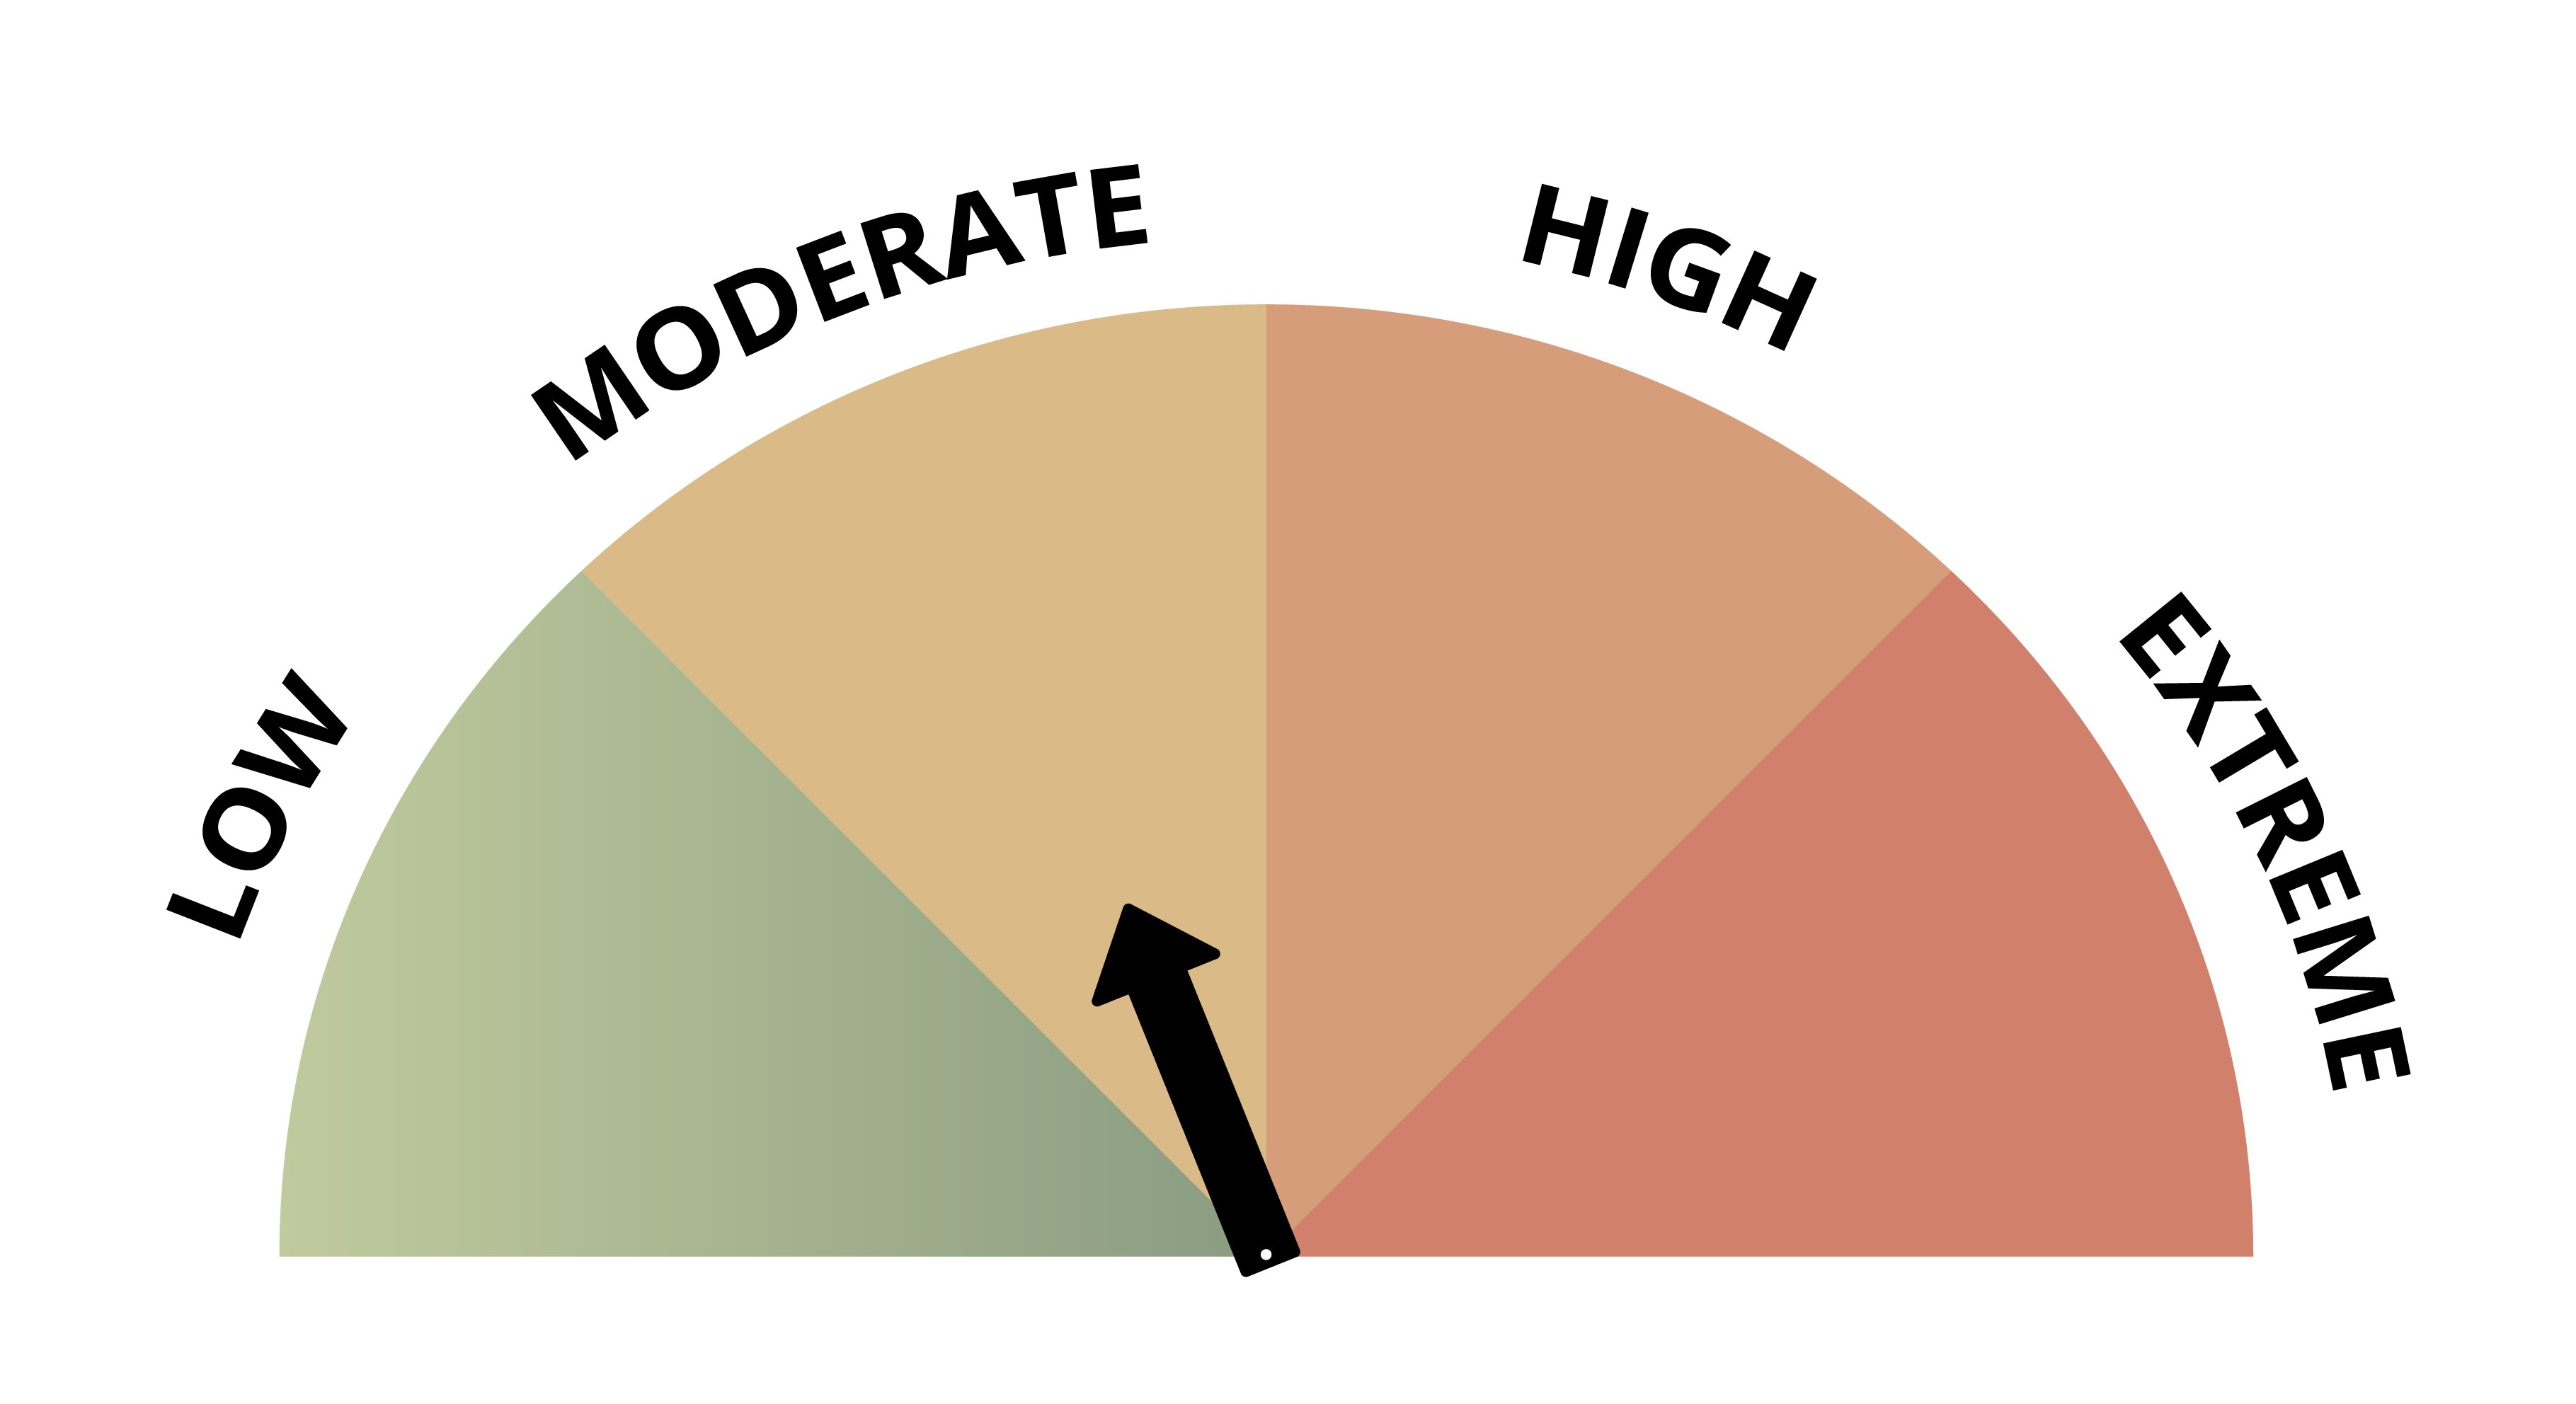 The current fire danger rating is moderate.